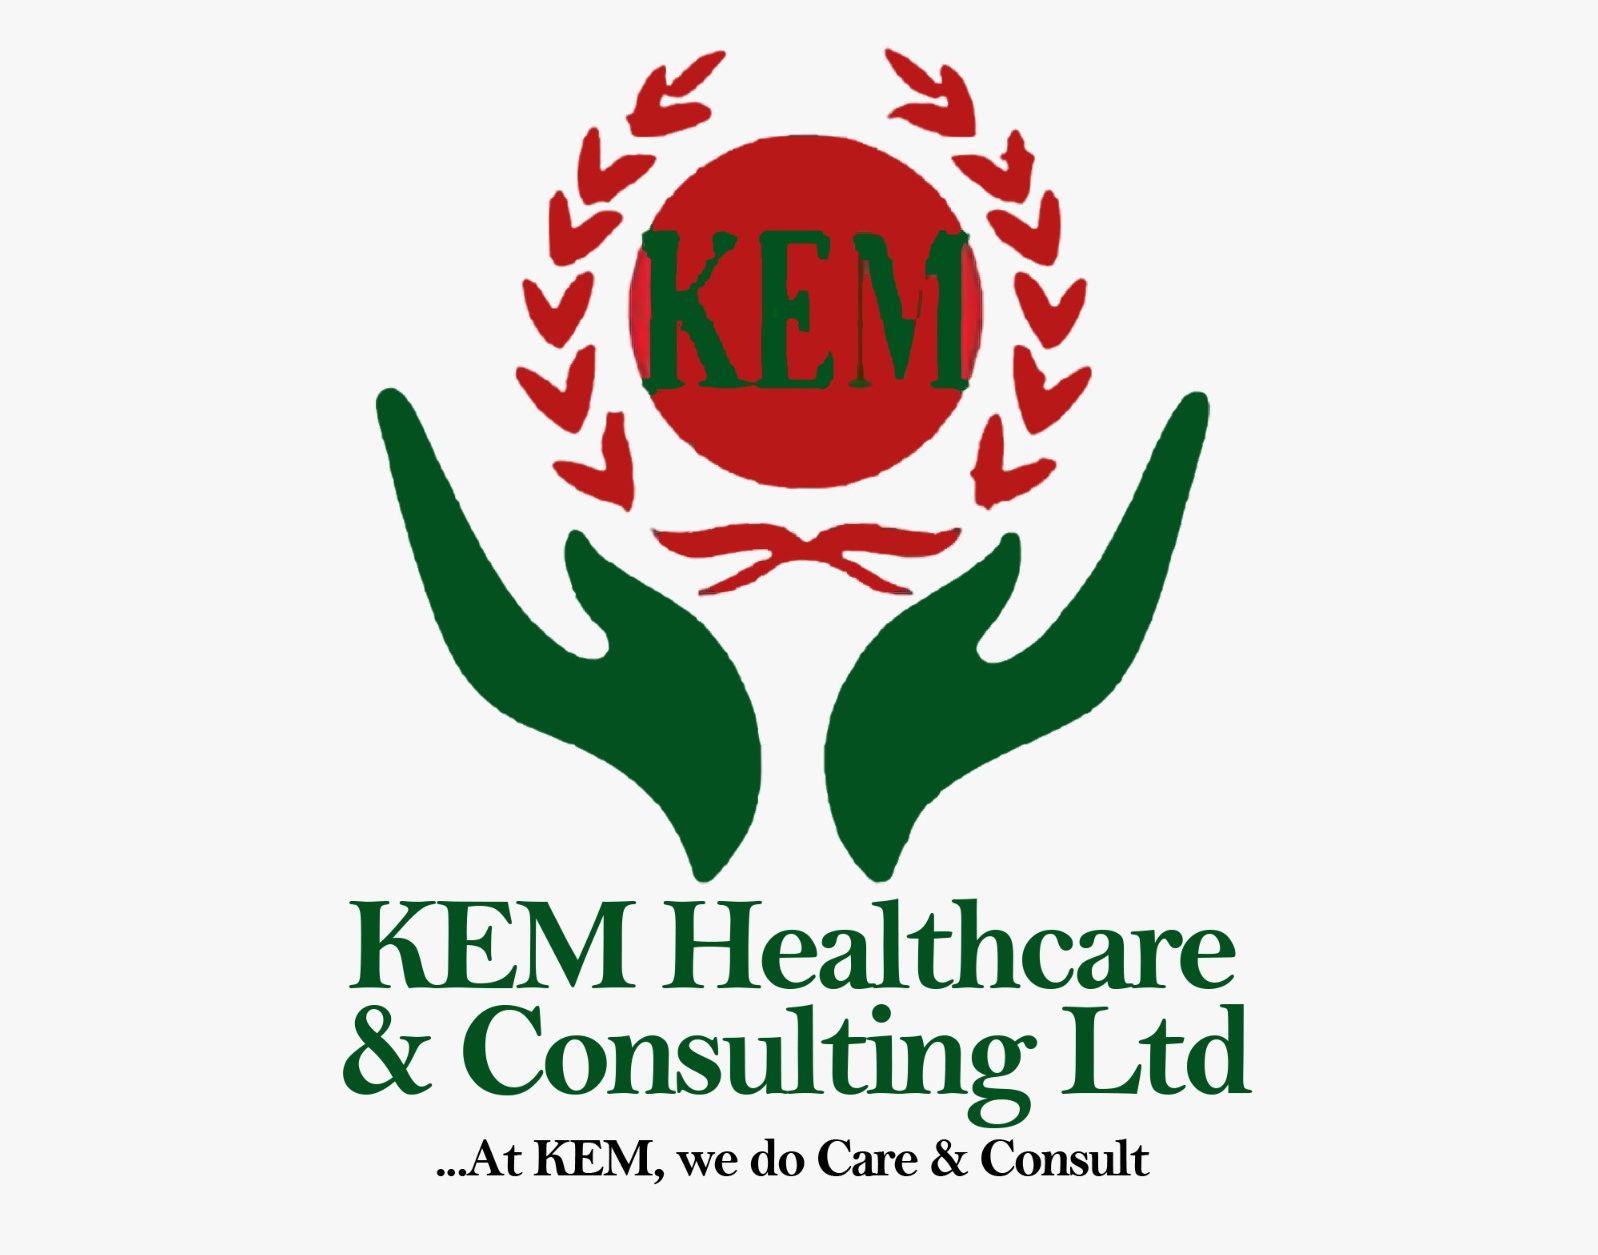 KEM Healthcare and Consulting Ltd